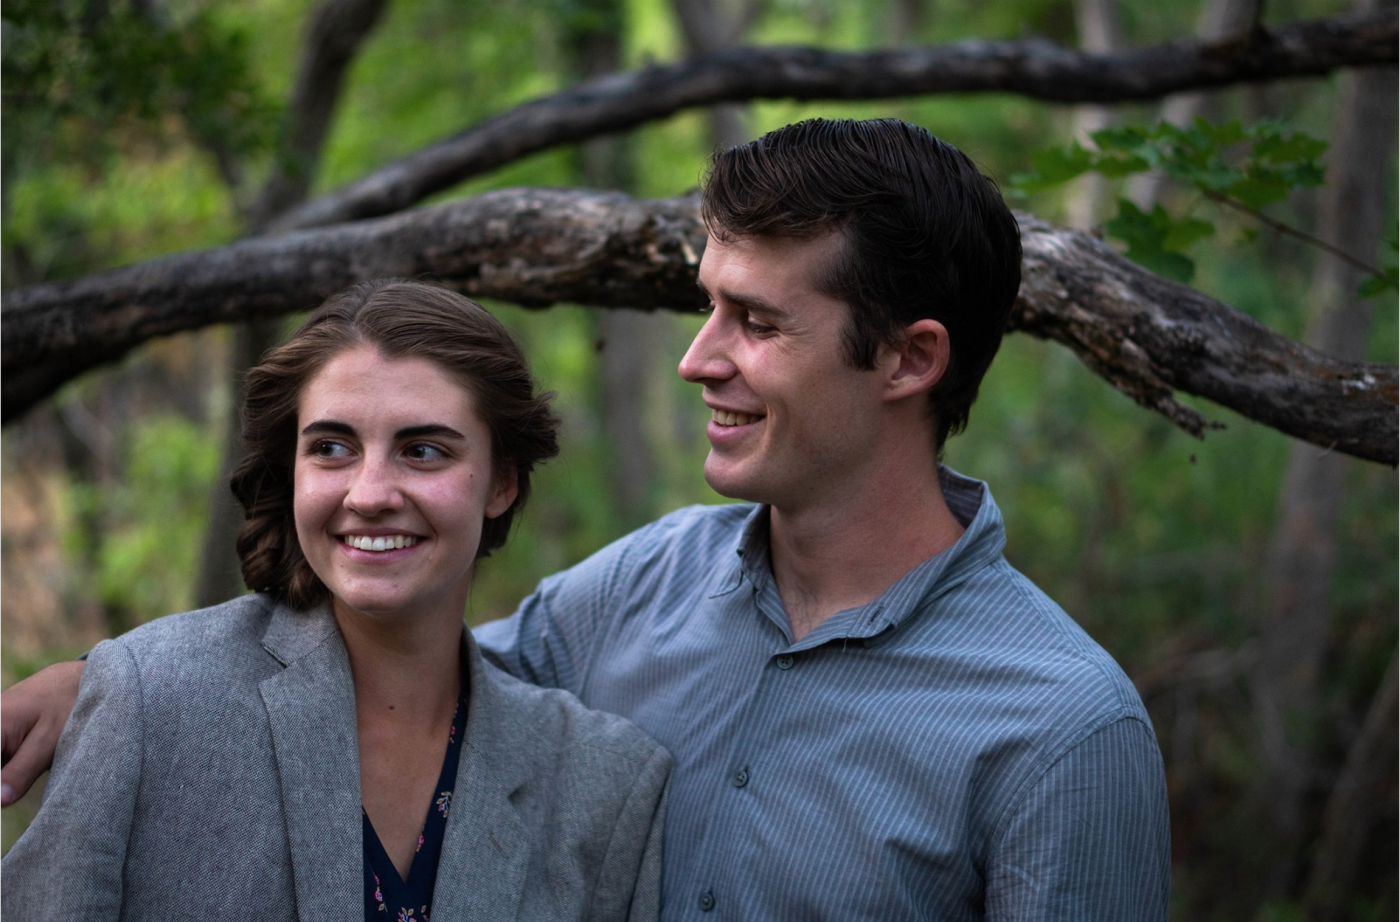 Ronald and Edith by The Fairy Story Society, featuring alums Jessica Graham and Connor Nelis Johnson